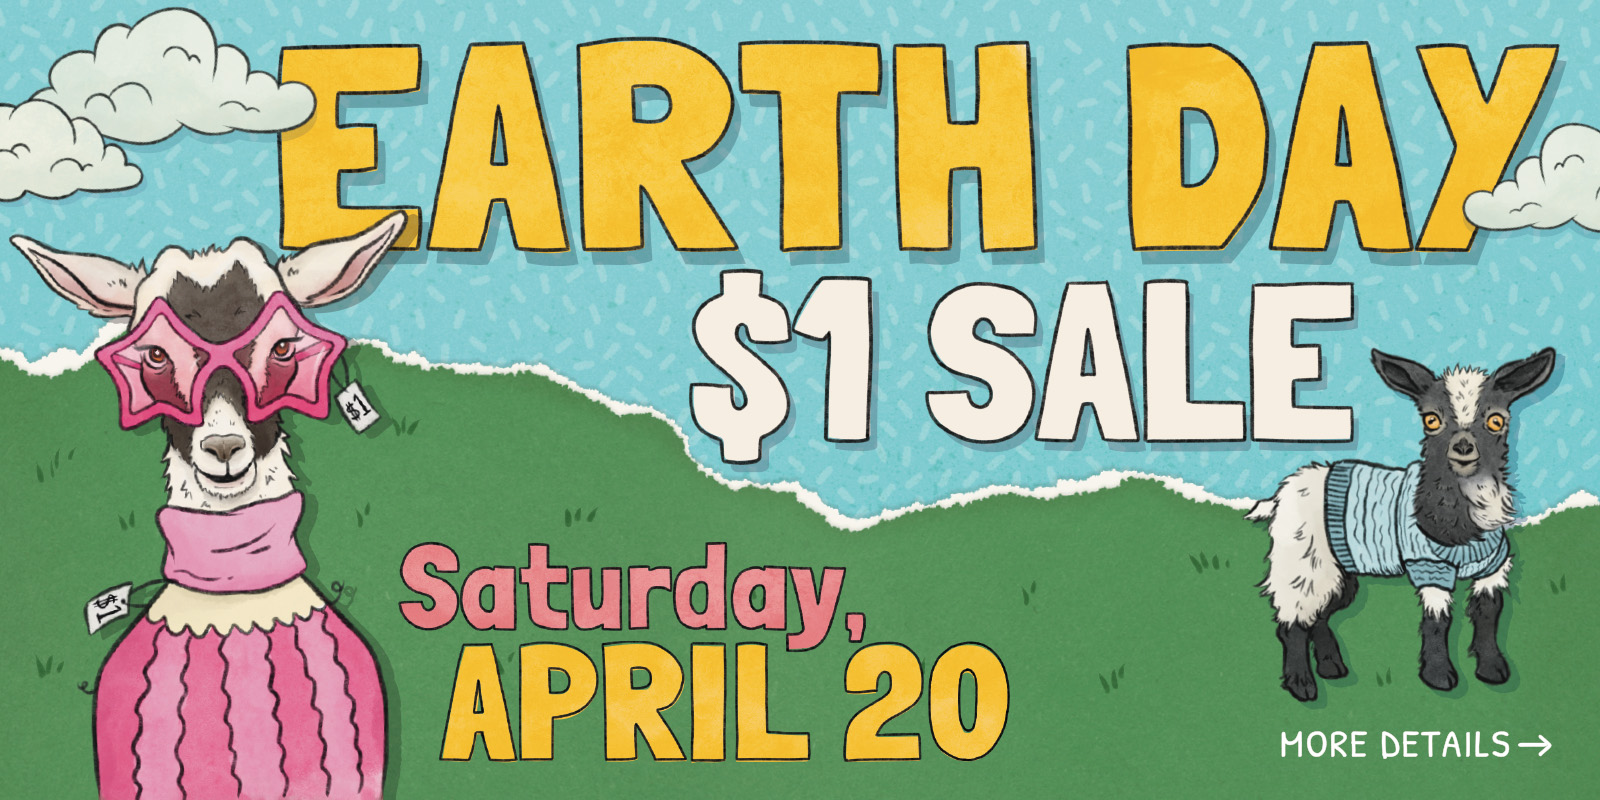 Reads Earth Day $1 Sale Saturday, April 20 More Details on backdrop of illustrated grass, sky and goats